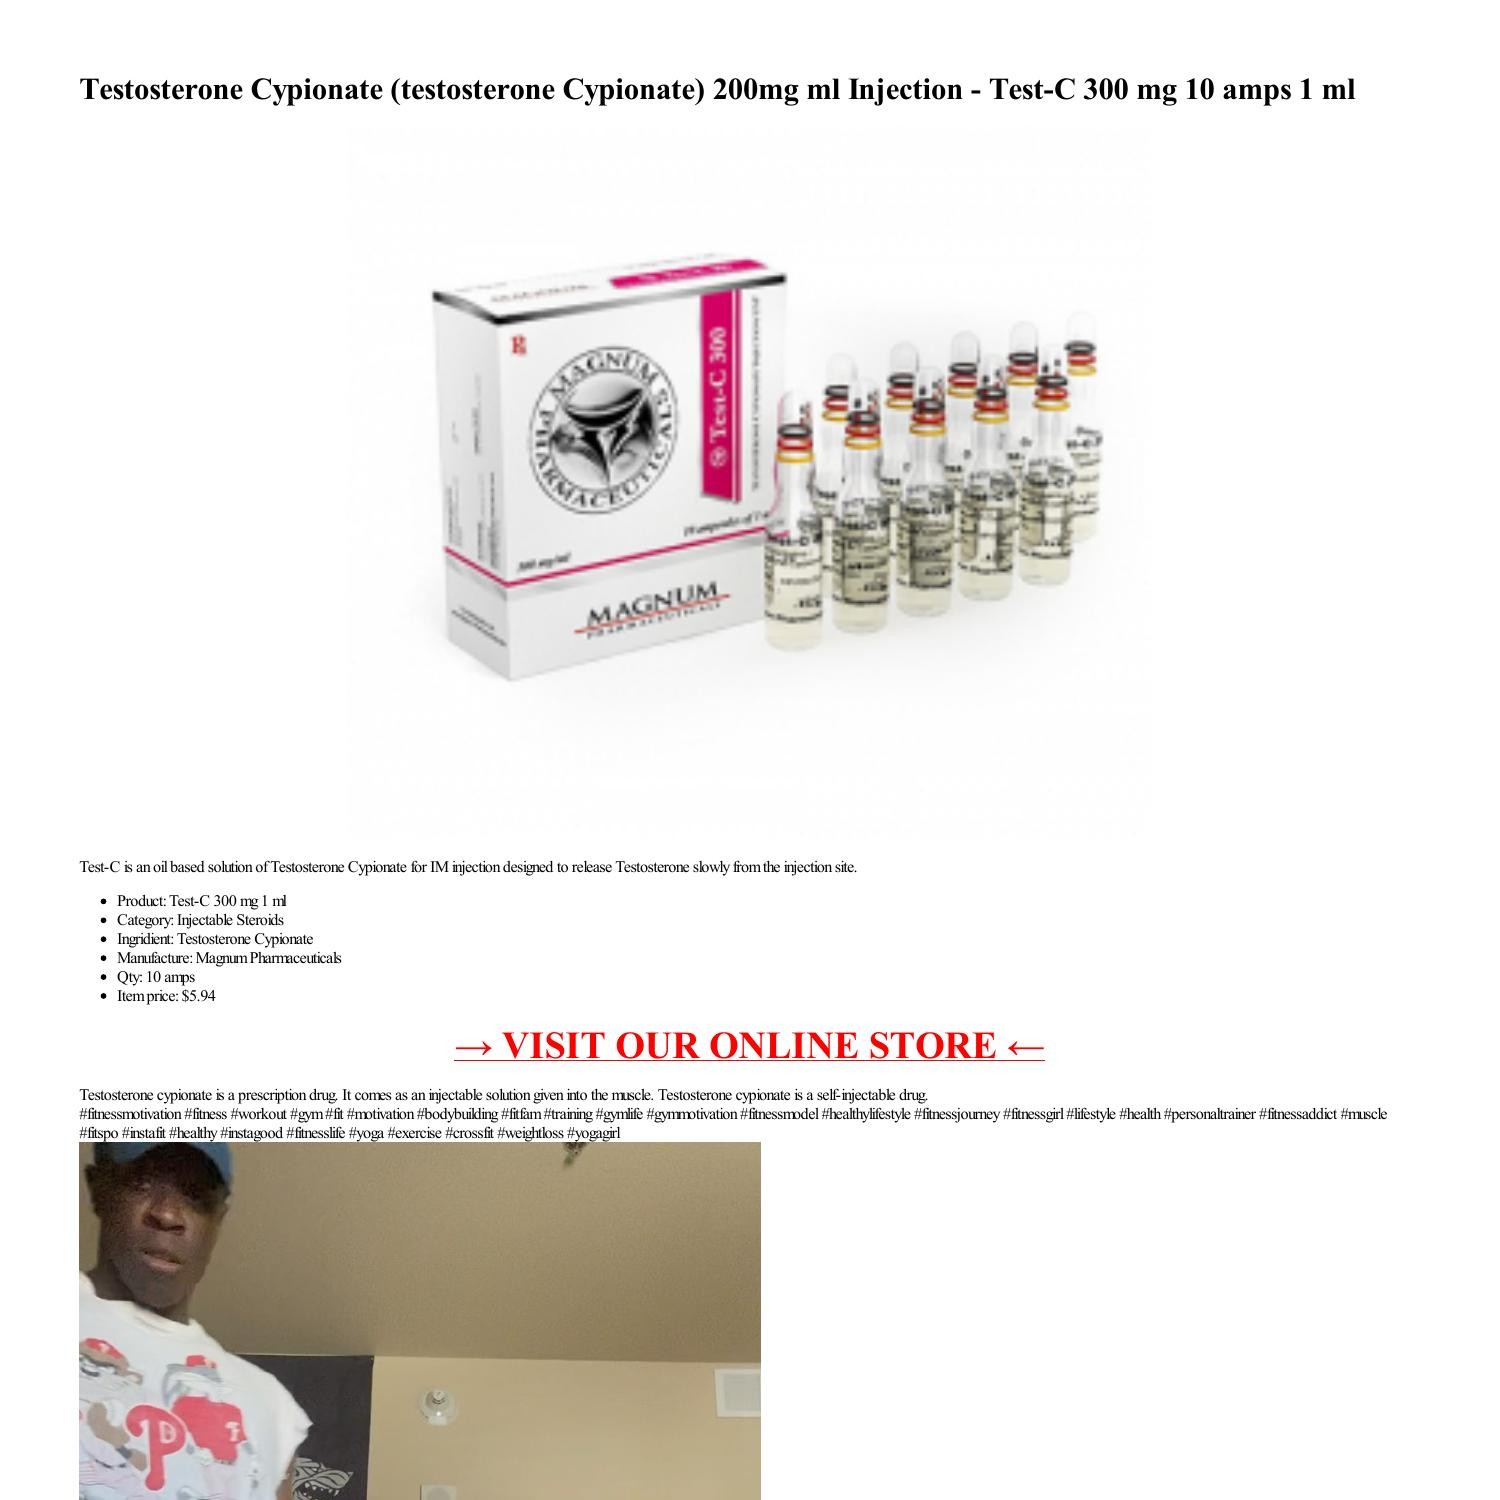 7 Easy Ways To Make Testosterone Cypionate Usage in Male Athletes Faster